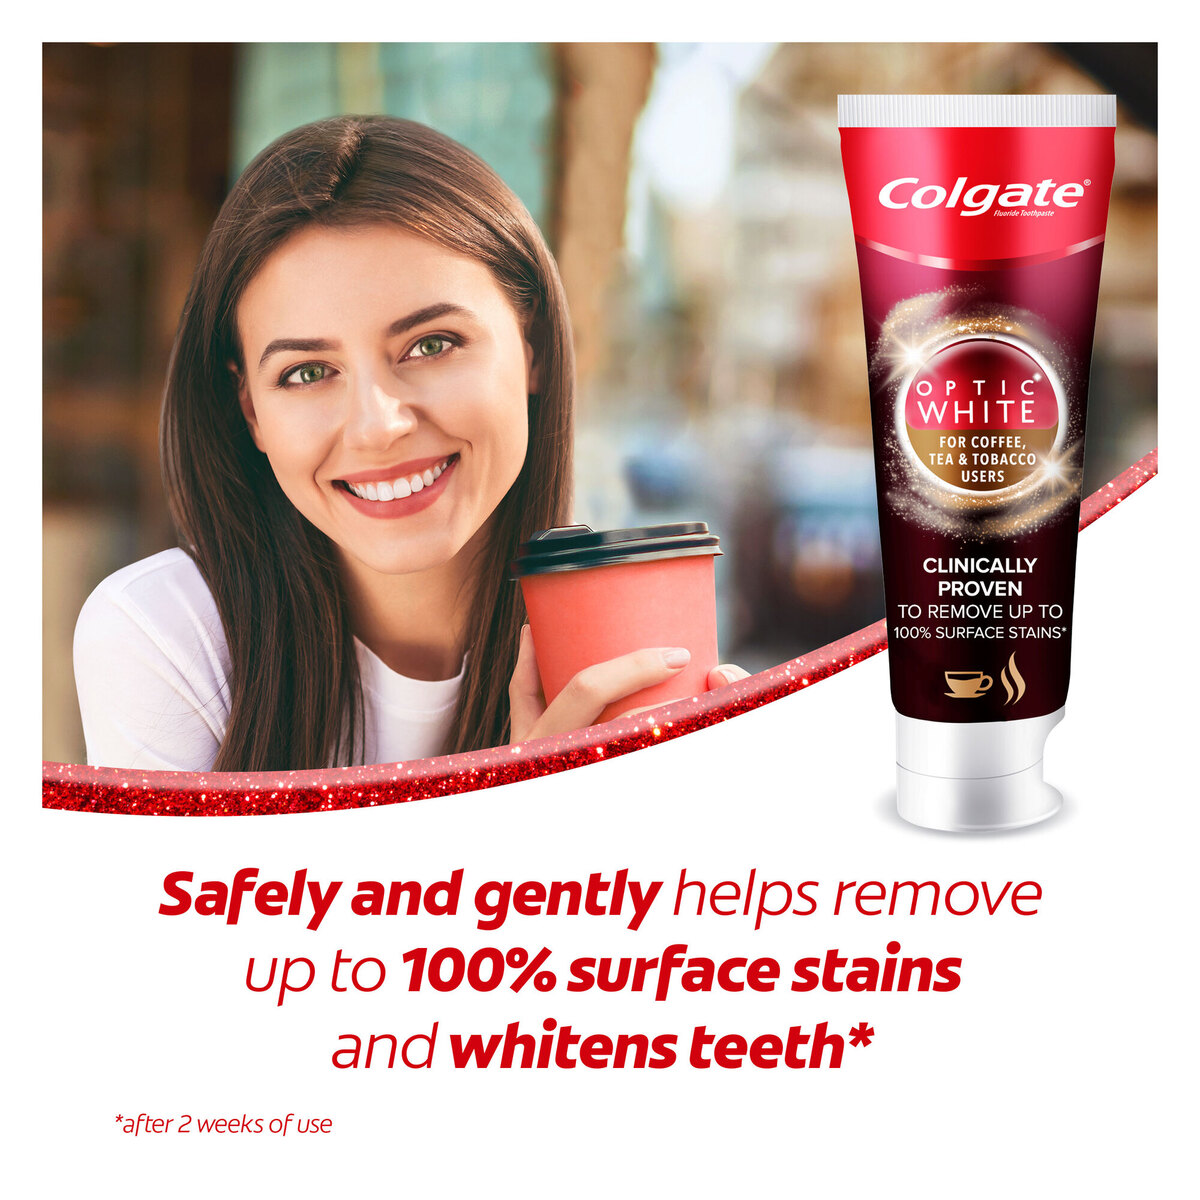 Colgate Optic White Toothpaste for Coffee, Tea and Tobaco Users, 75 ml